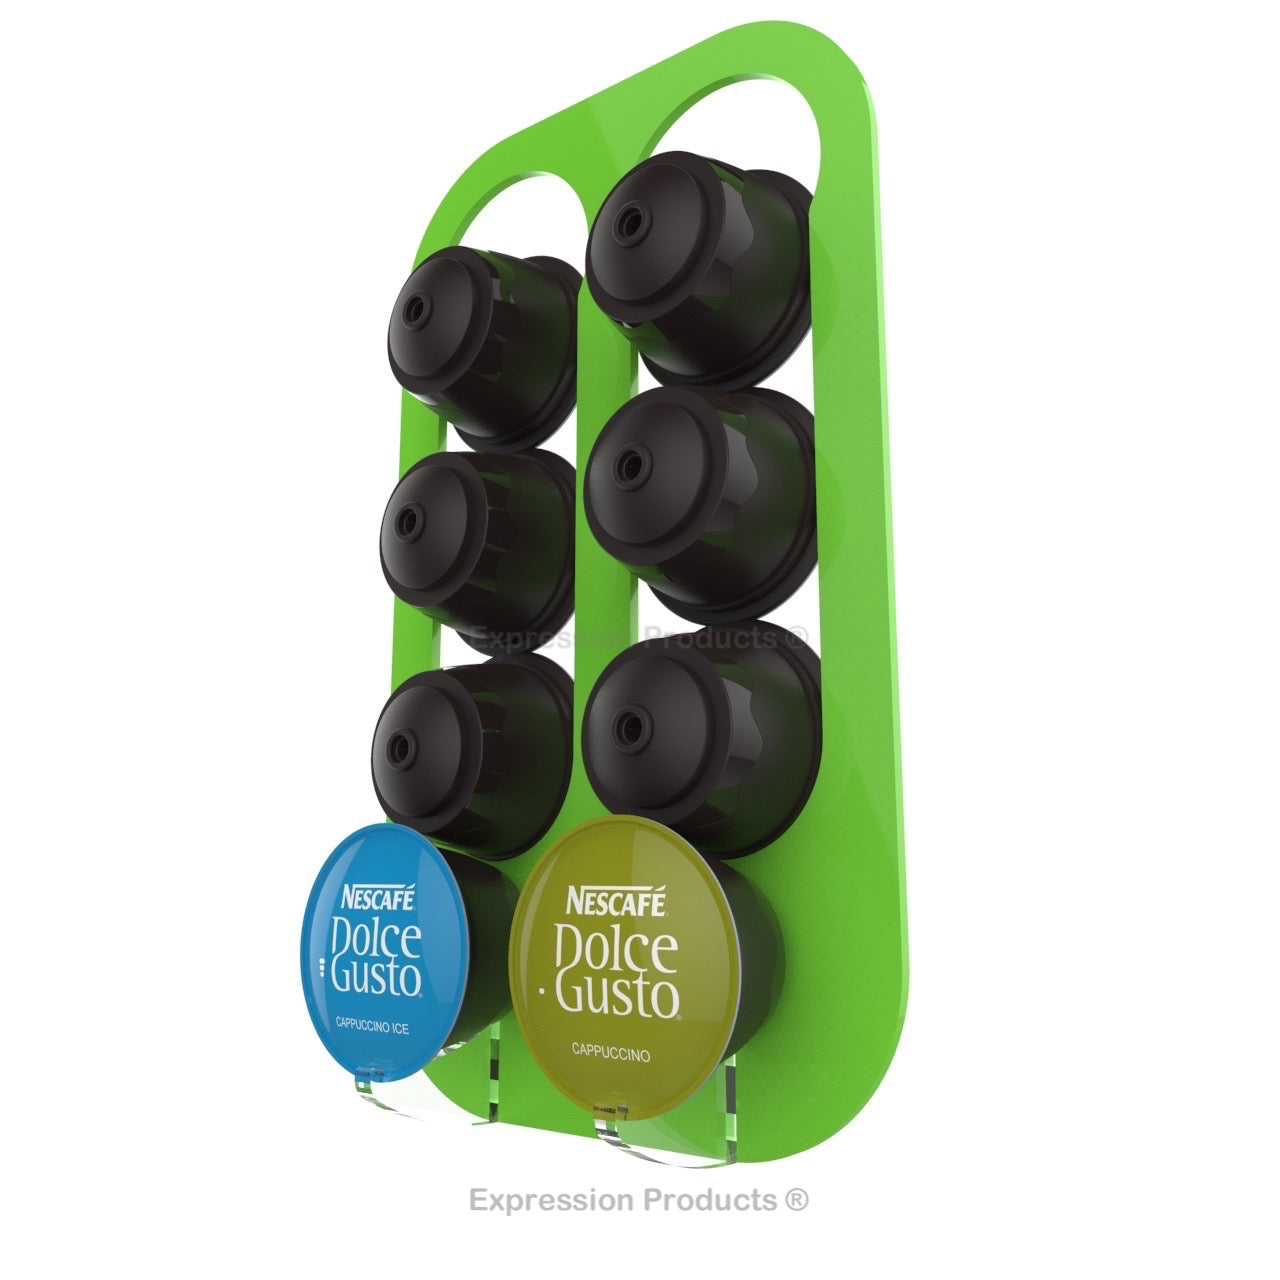 Dolce gusto coffee pod holder, wall mounted, half height.  Shown in lime holding 8 pods